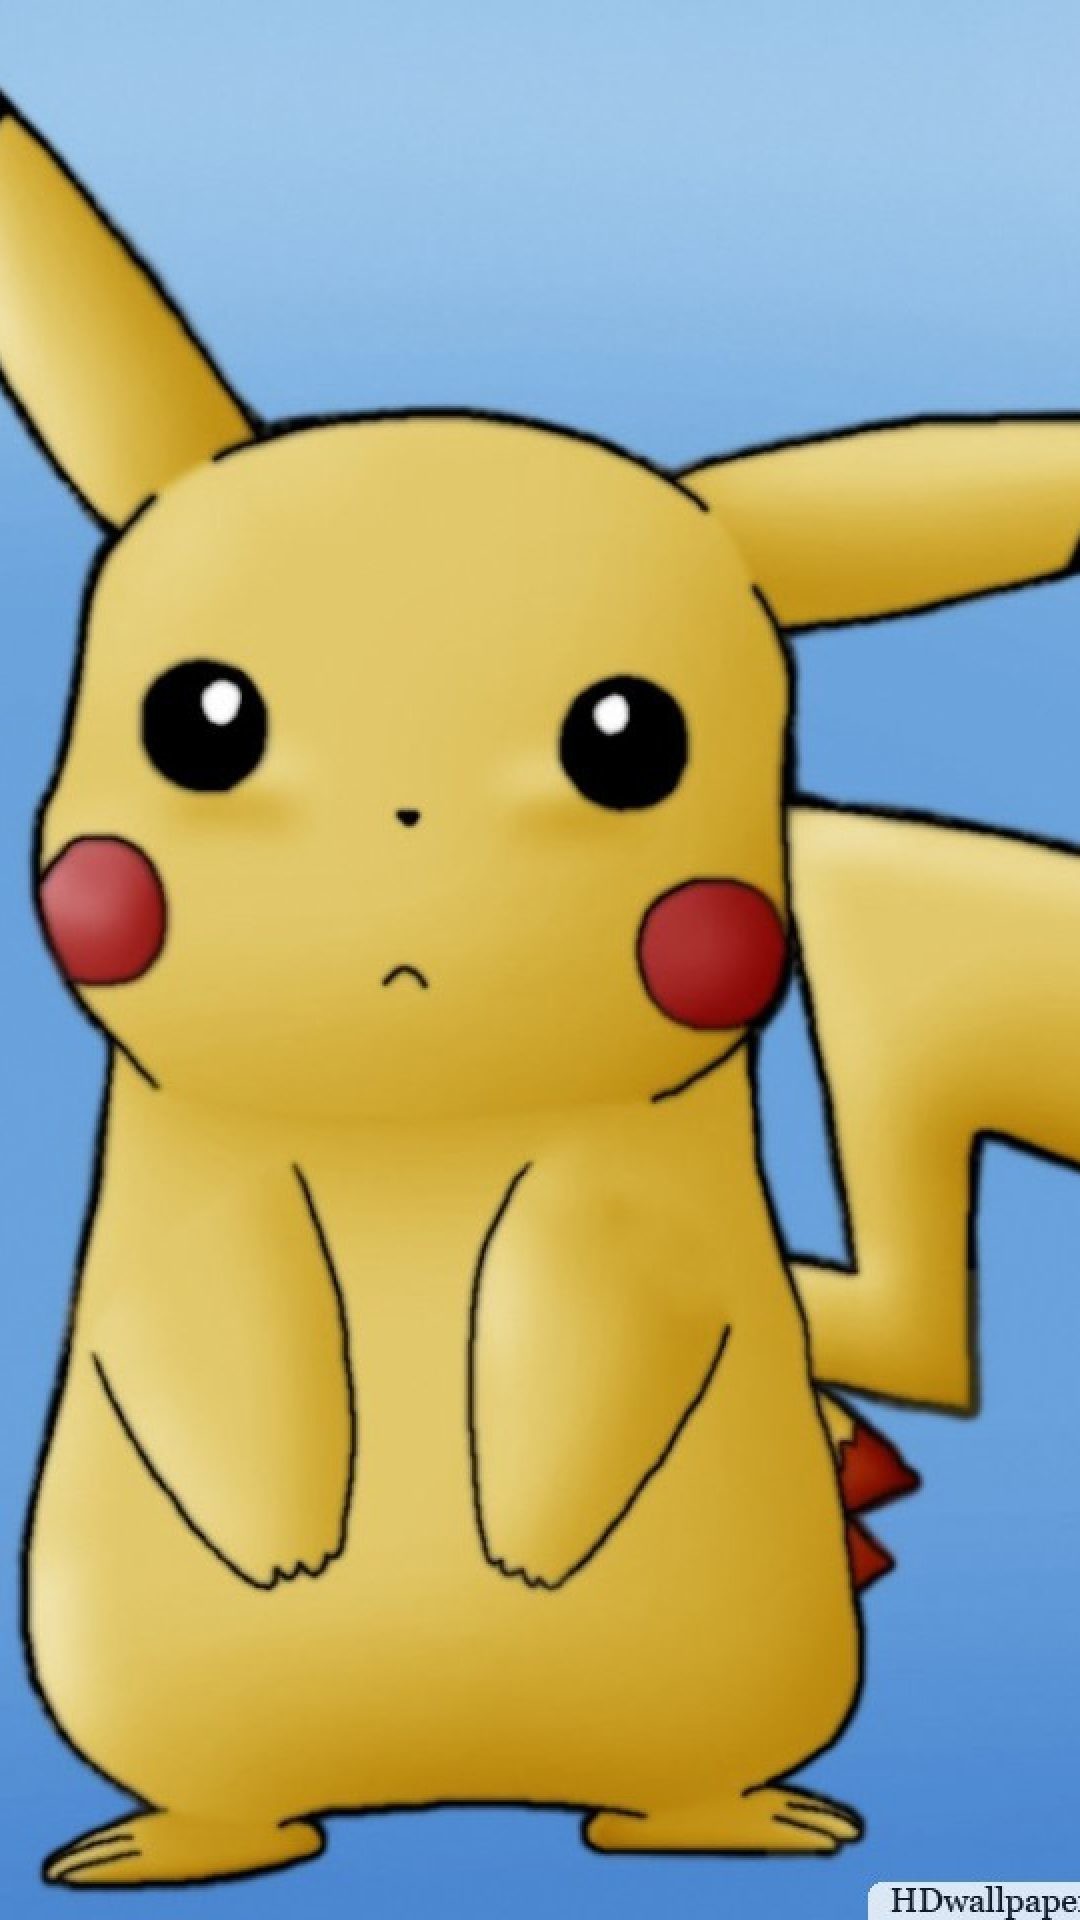 Pikachu wallpaper for iphone